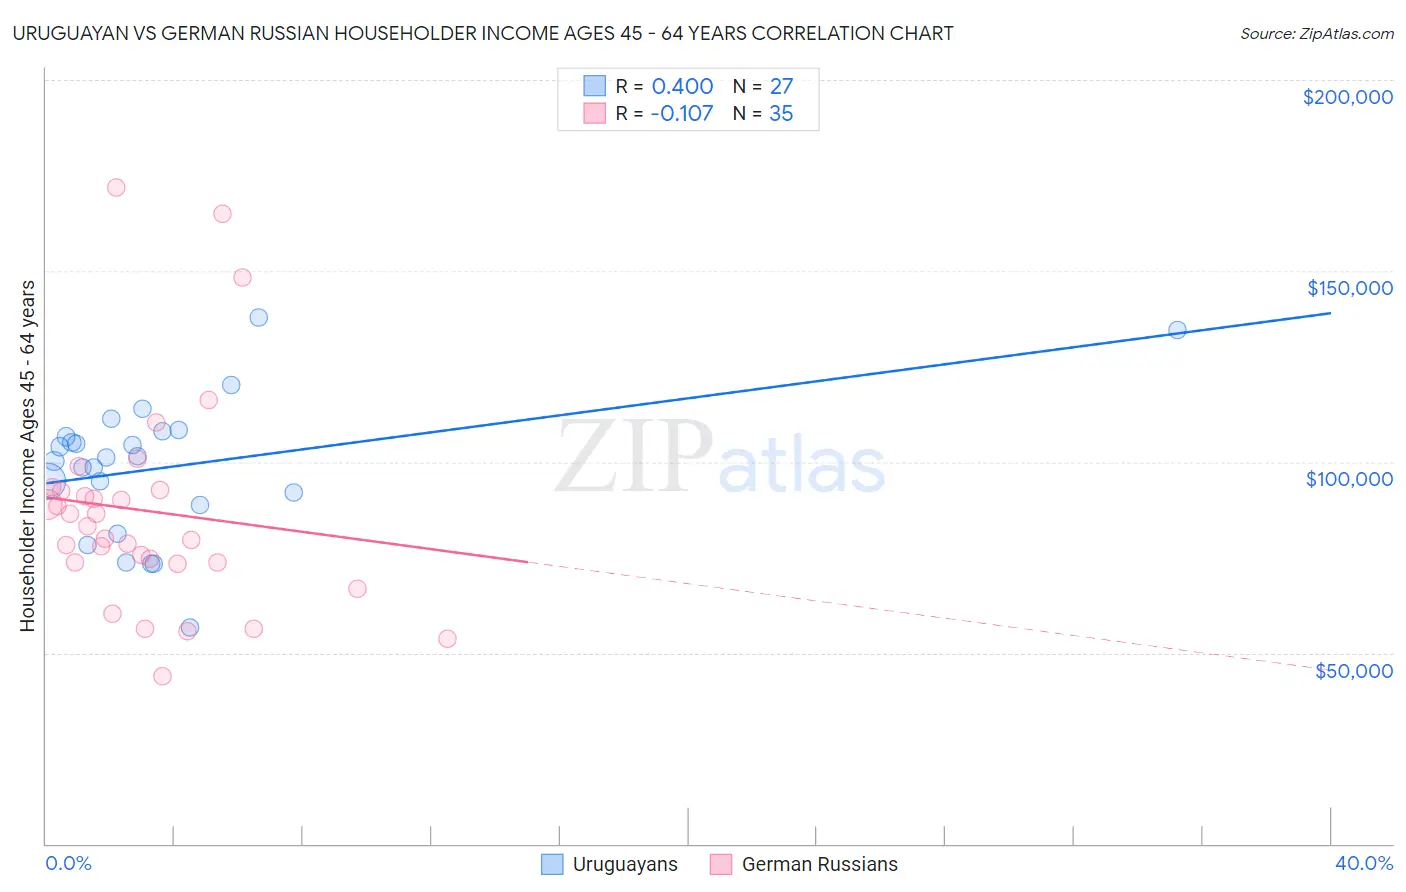 Uruguayan vs German Russian Householder Income Ages 45 - 64 years